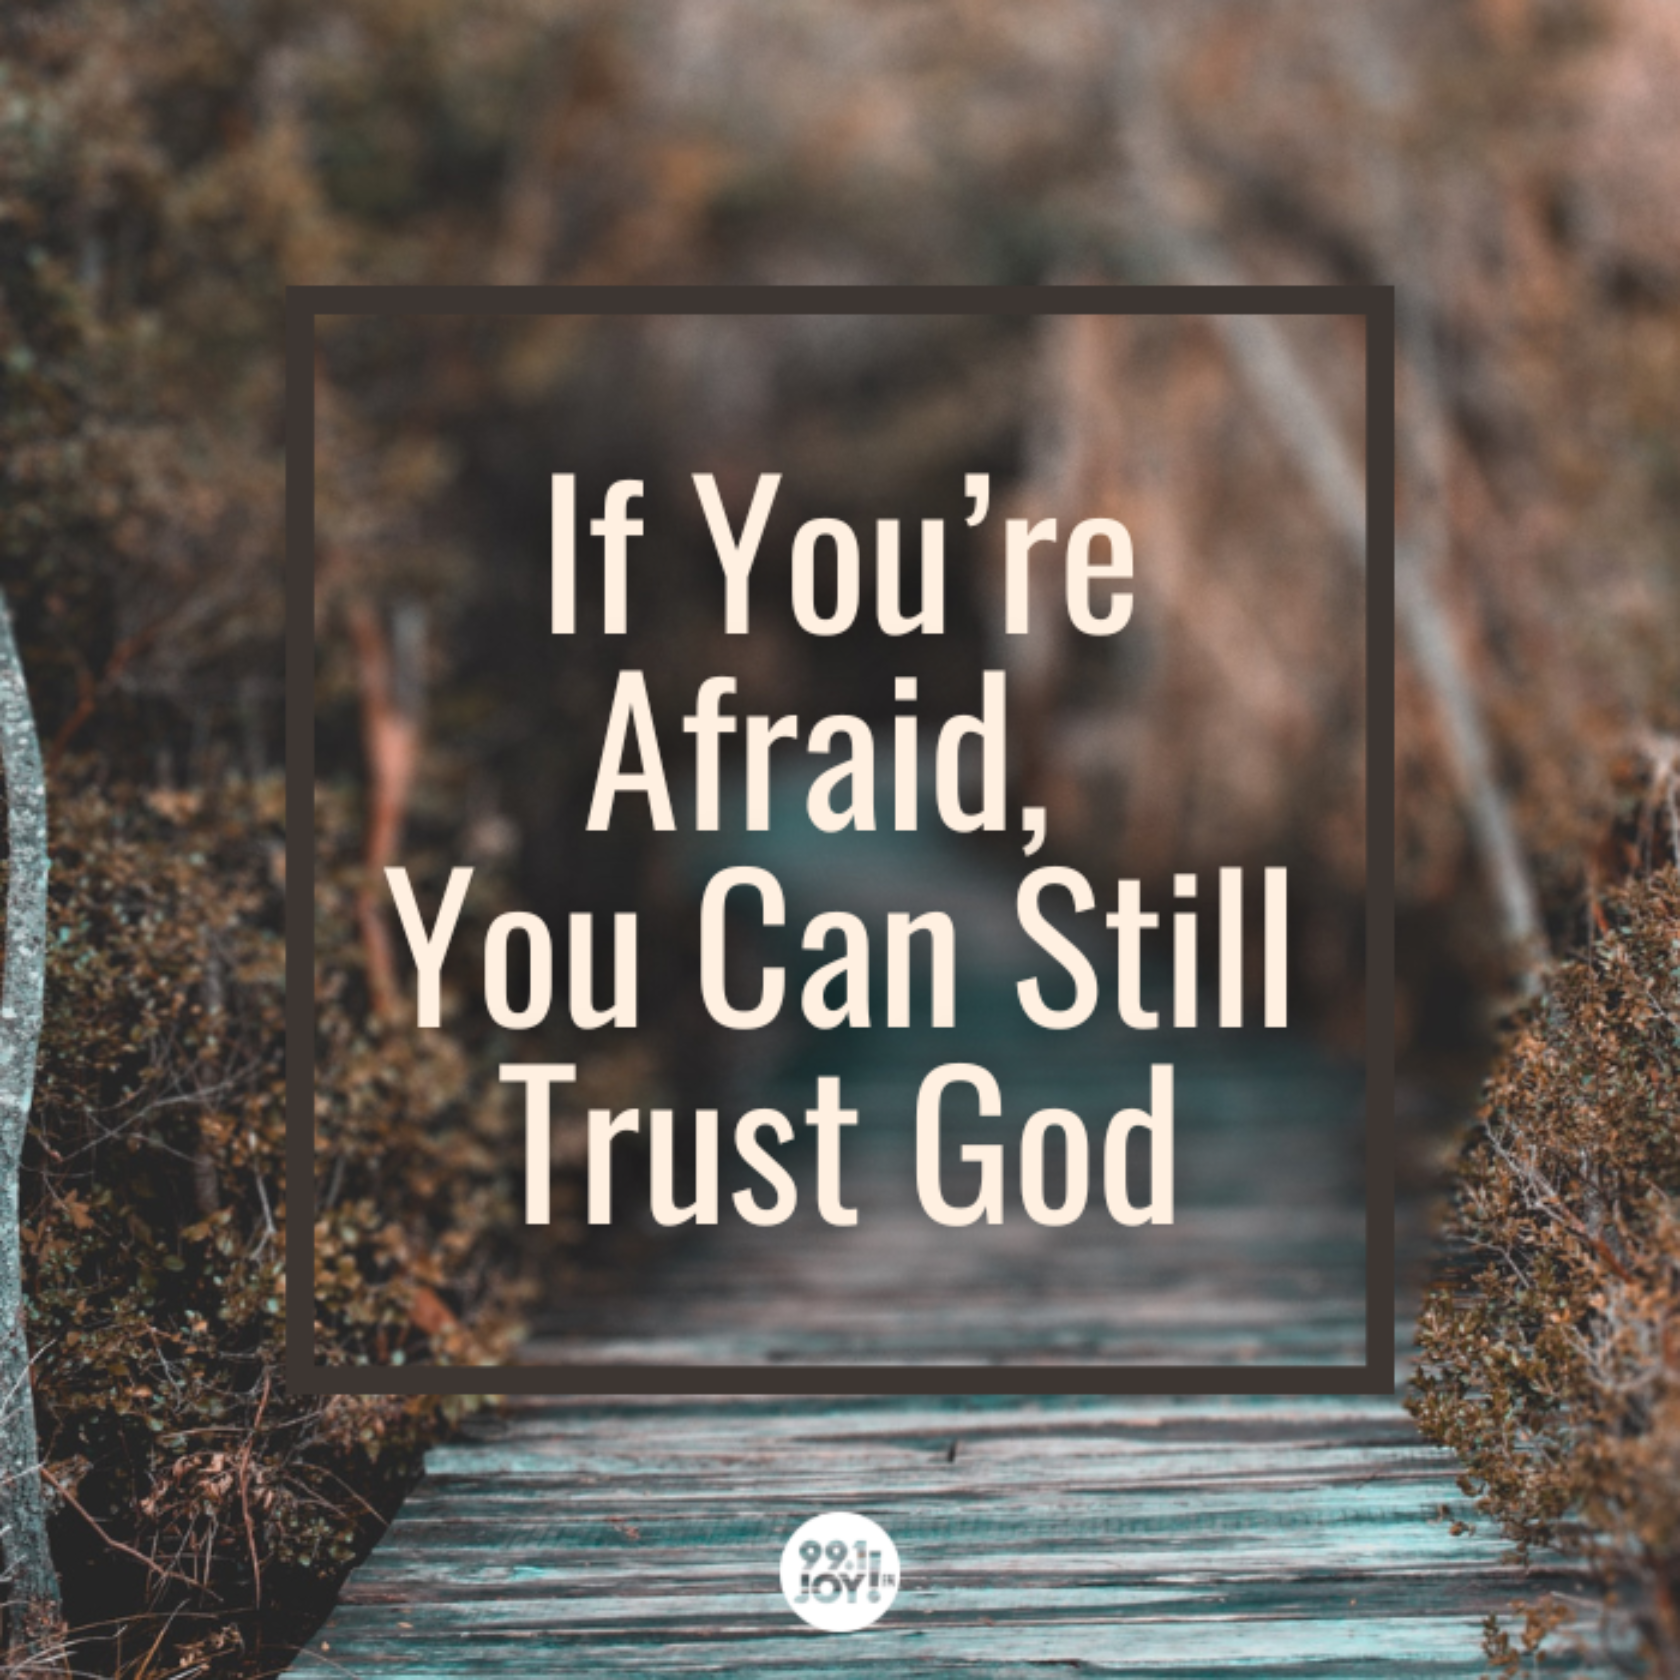 If You’re Afraid, You Can Still Trust God